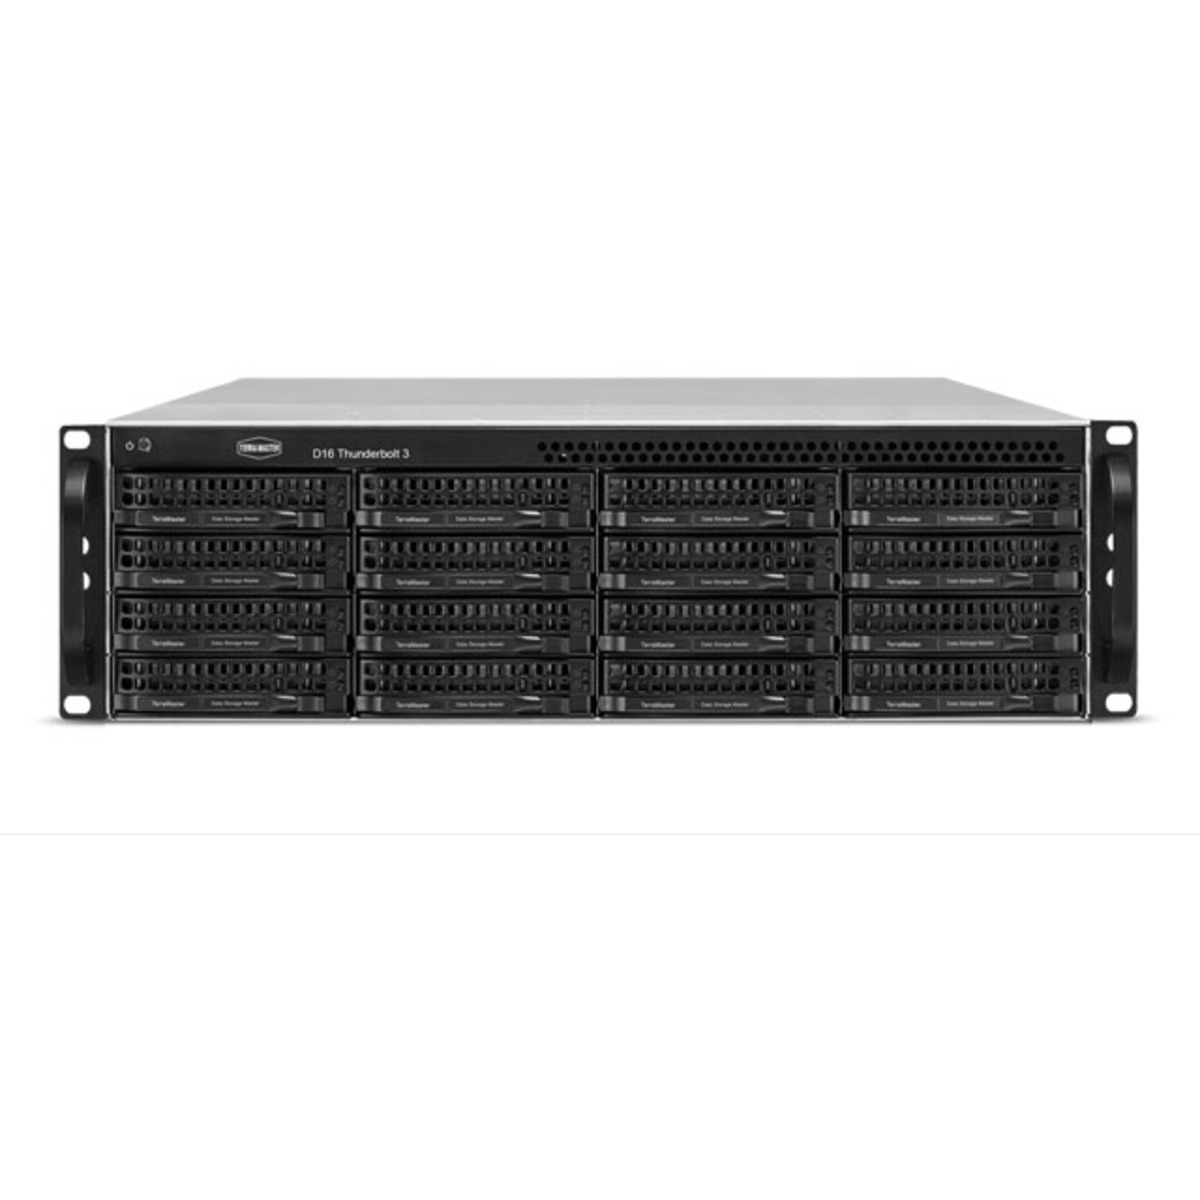 TerraMaster D16 Thunderbolt 3 88tb 16-Bay RackMount Multimedia / Power User / Business DAS - Direct Attached Storage Device 11x8tb Samsung 870 QVO MZ-77Q8T0 2.5 560/530MB/s SATA 6Gb/s SSD CONSUMER Class Drives Installed - Burn-In Tested D16 Thunderbolt 3